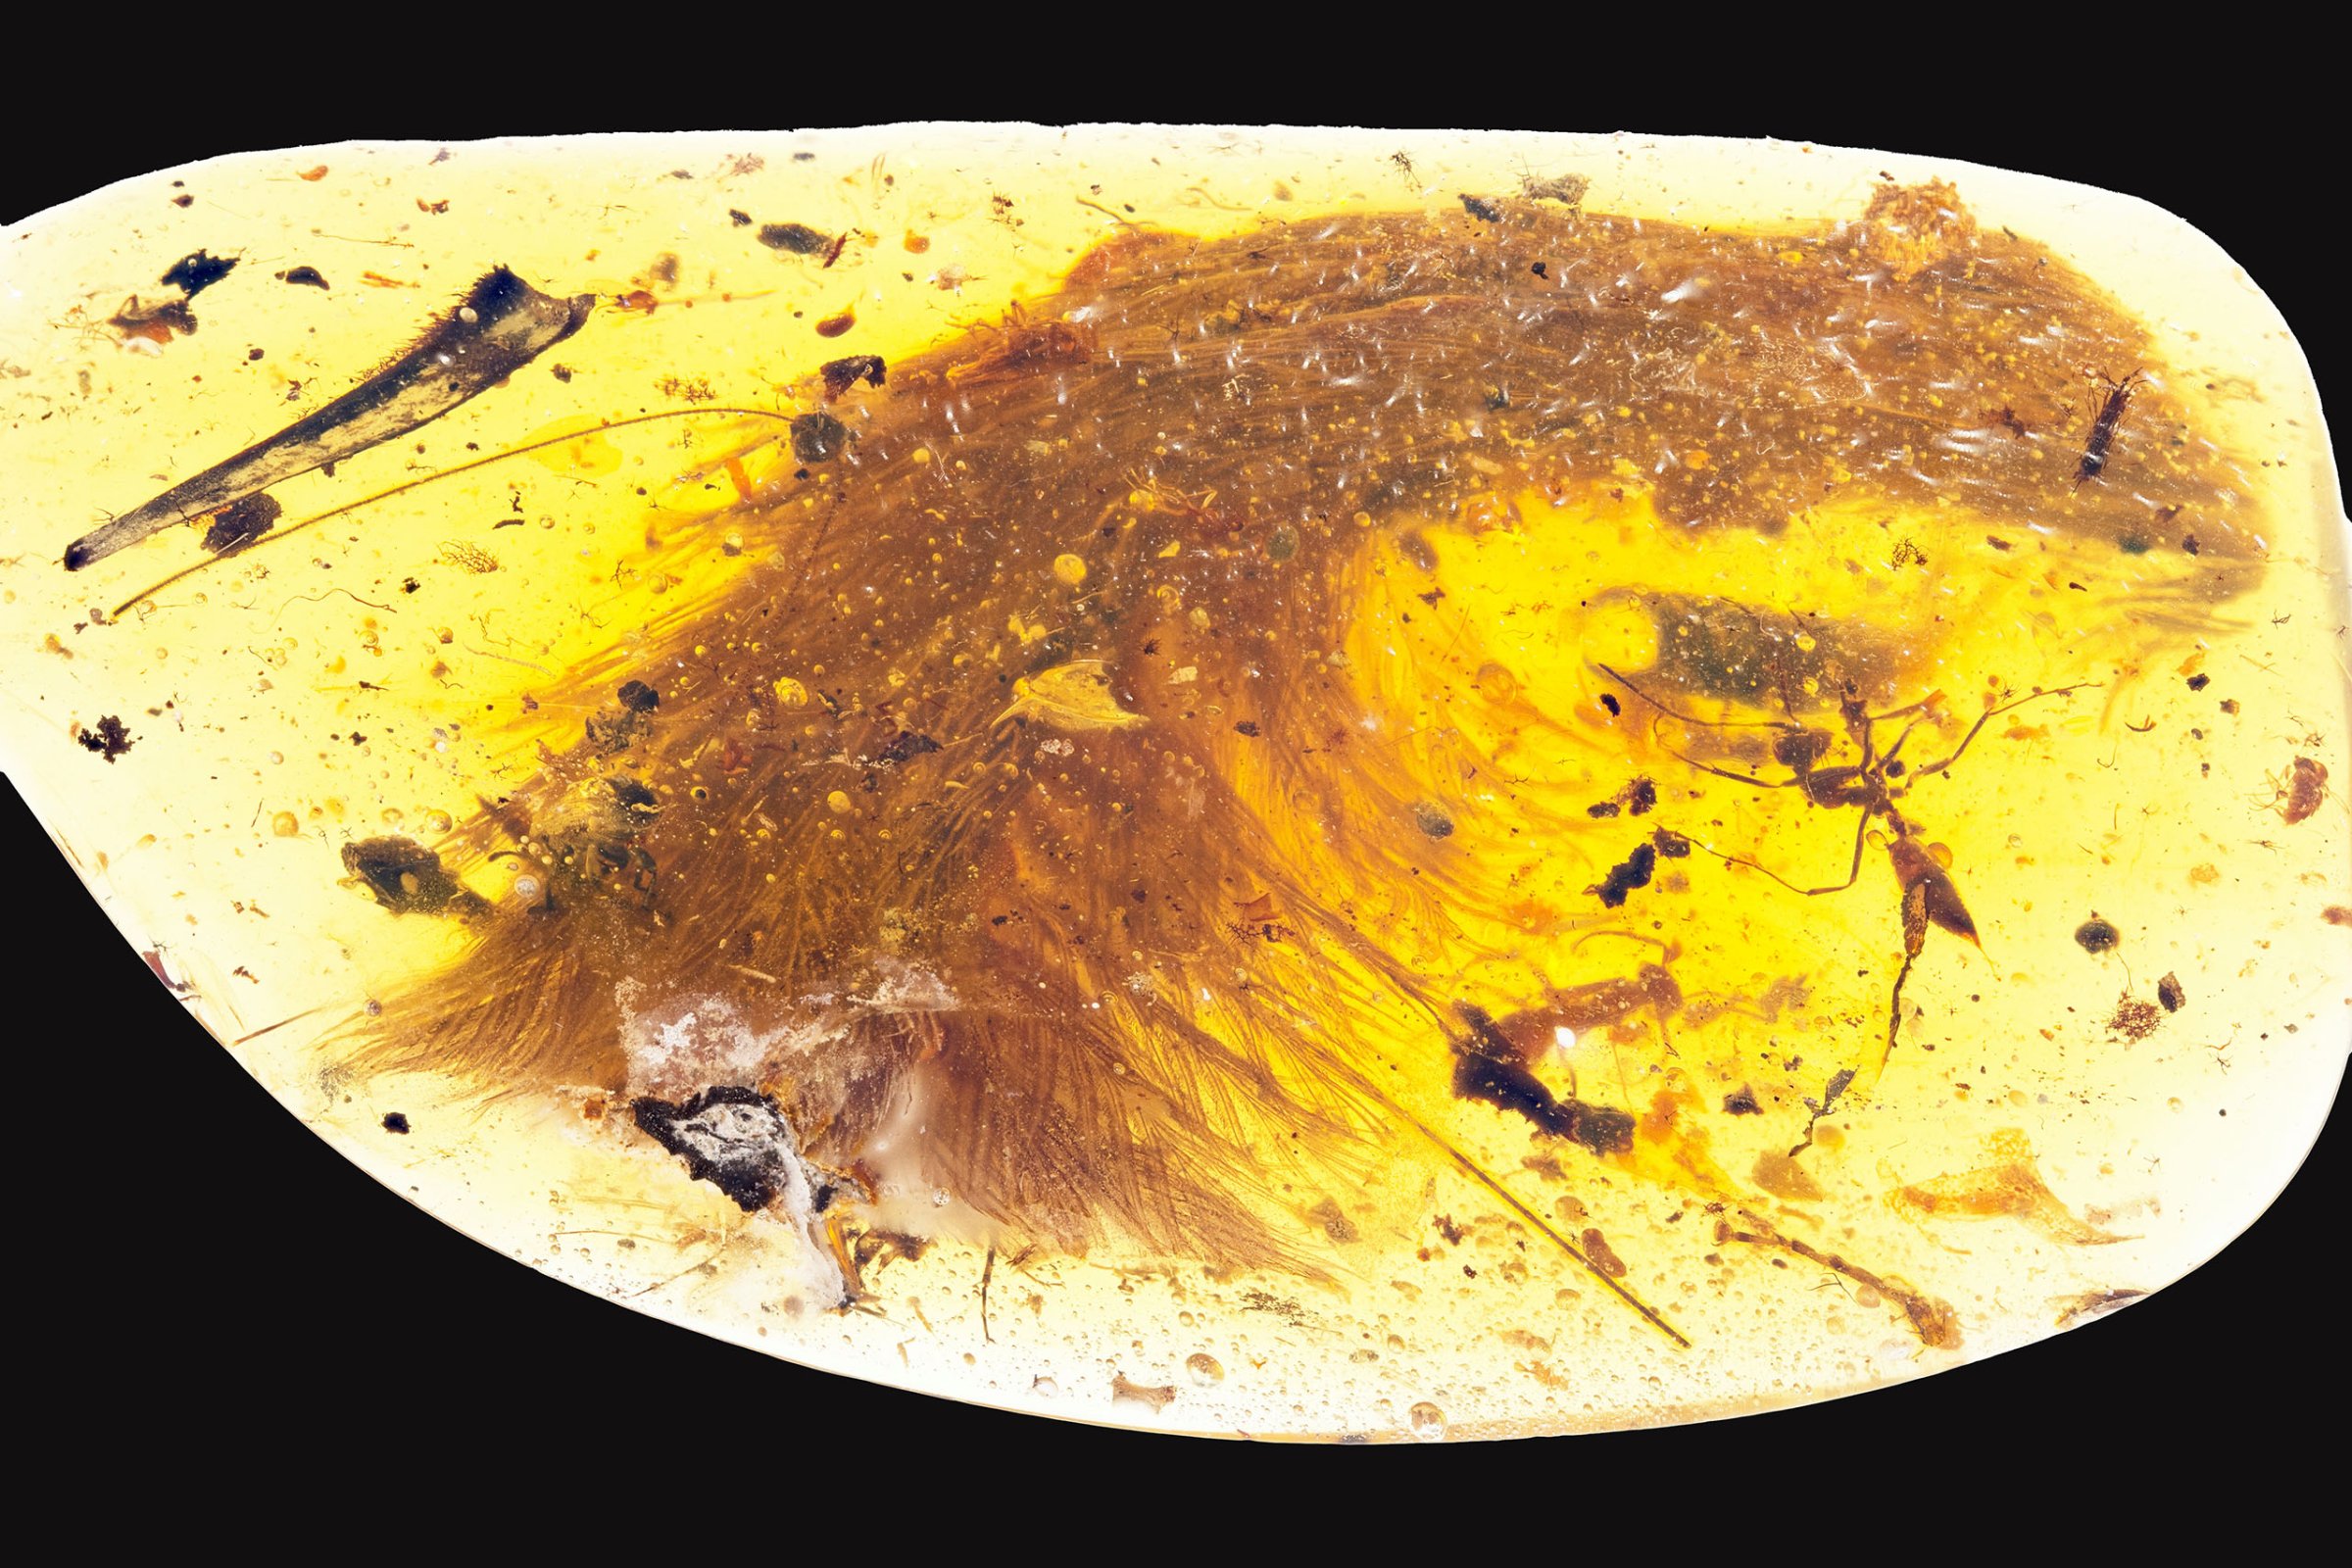 A chunk of amber - fossilized resin - shows the tip of a preserved dinosaur tail section in this image released by the Royal Saskatchewan Museum in Canada on Dec. 8, 2016.